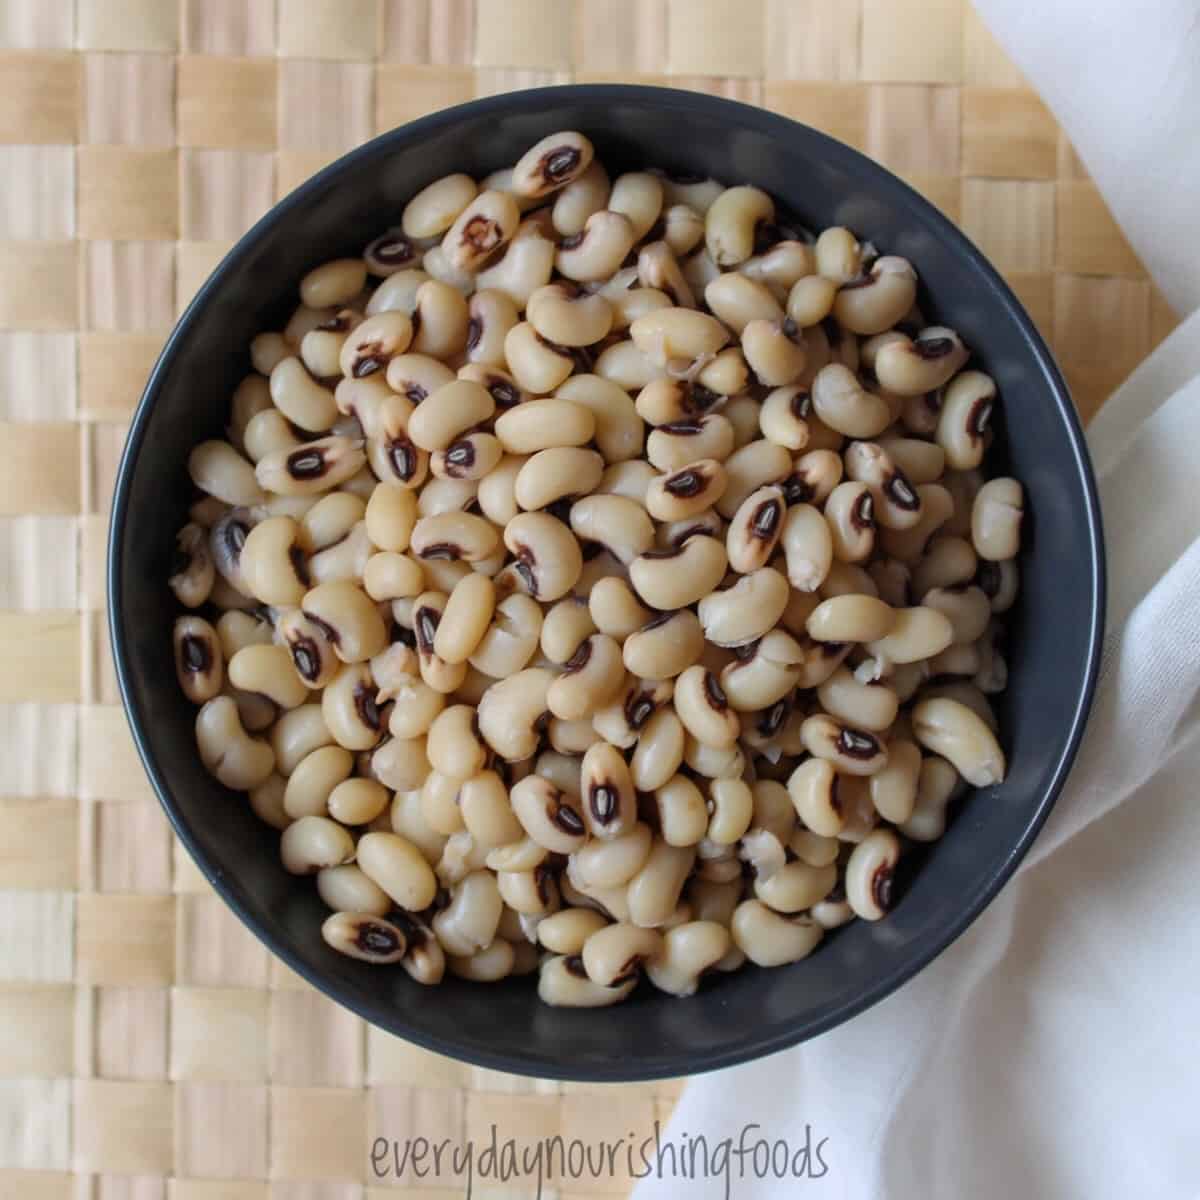 Black-eyed peas cooked in a bowl